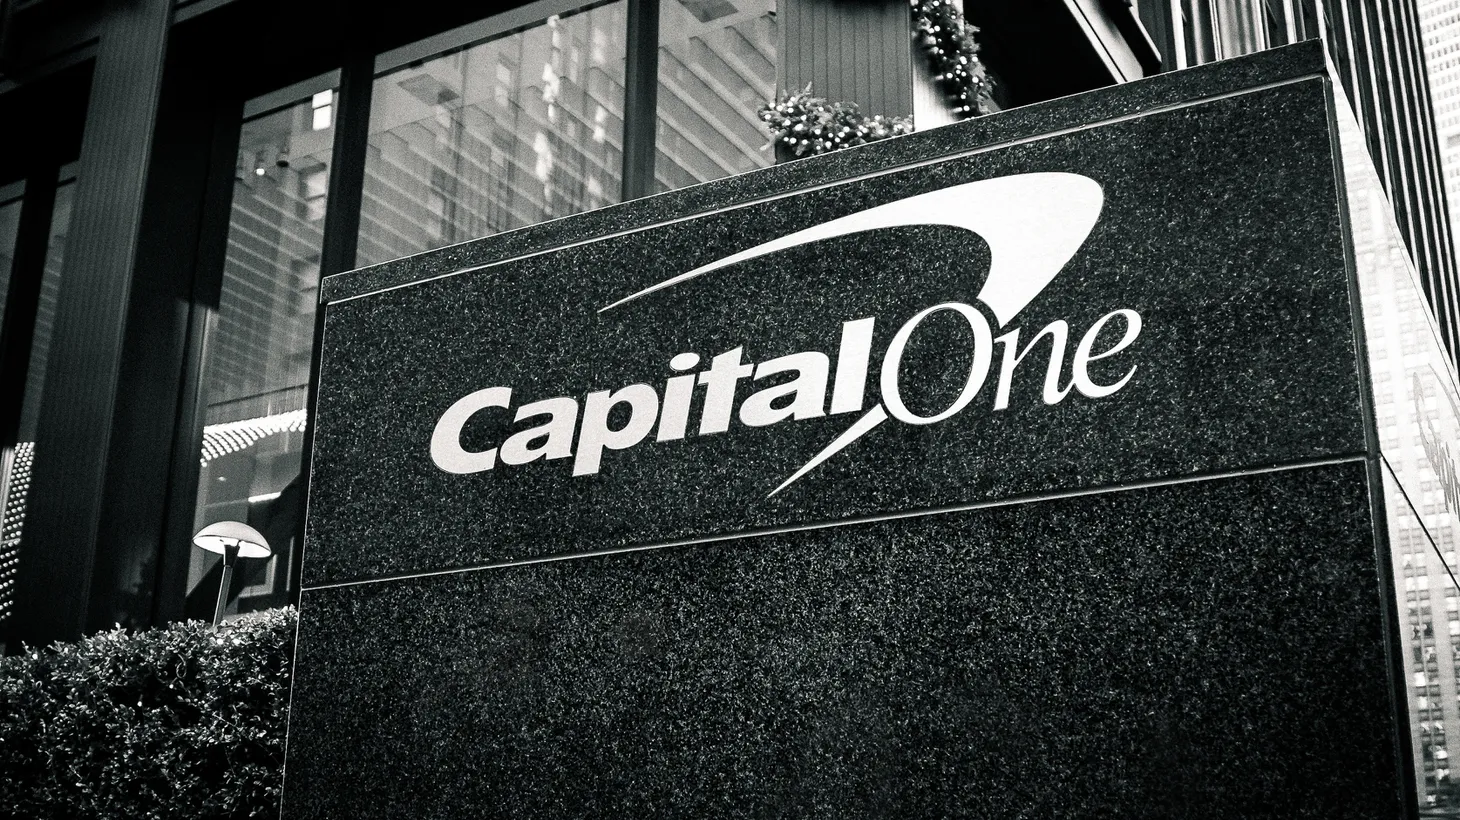 Capital One has announced that it’s ending overdraft fees completely.